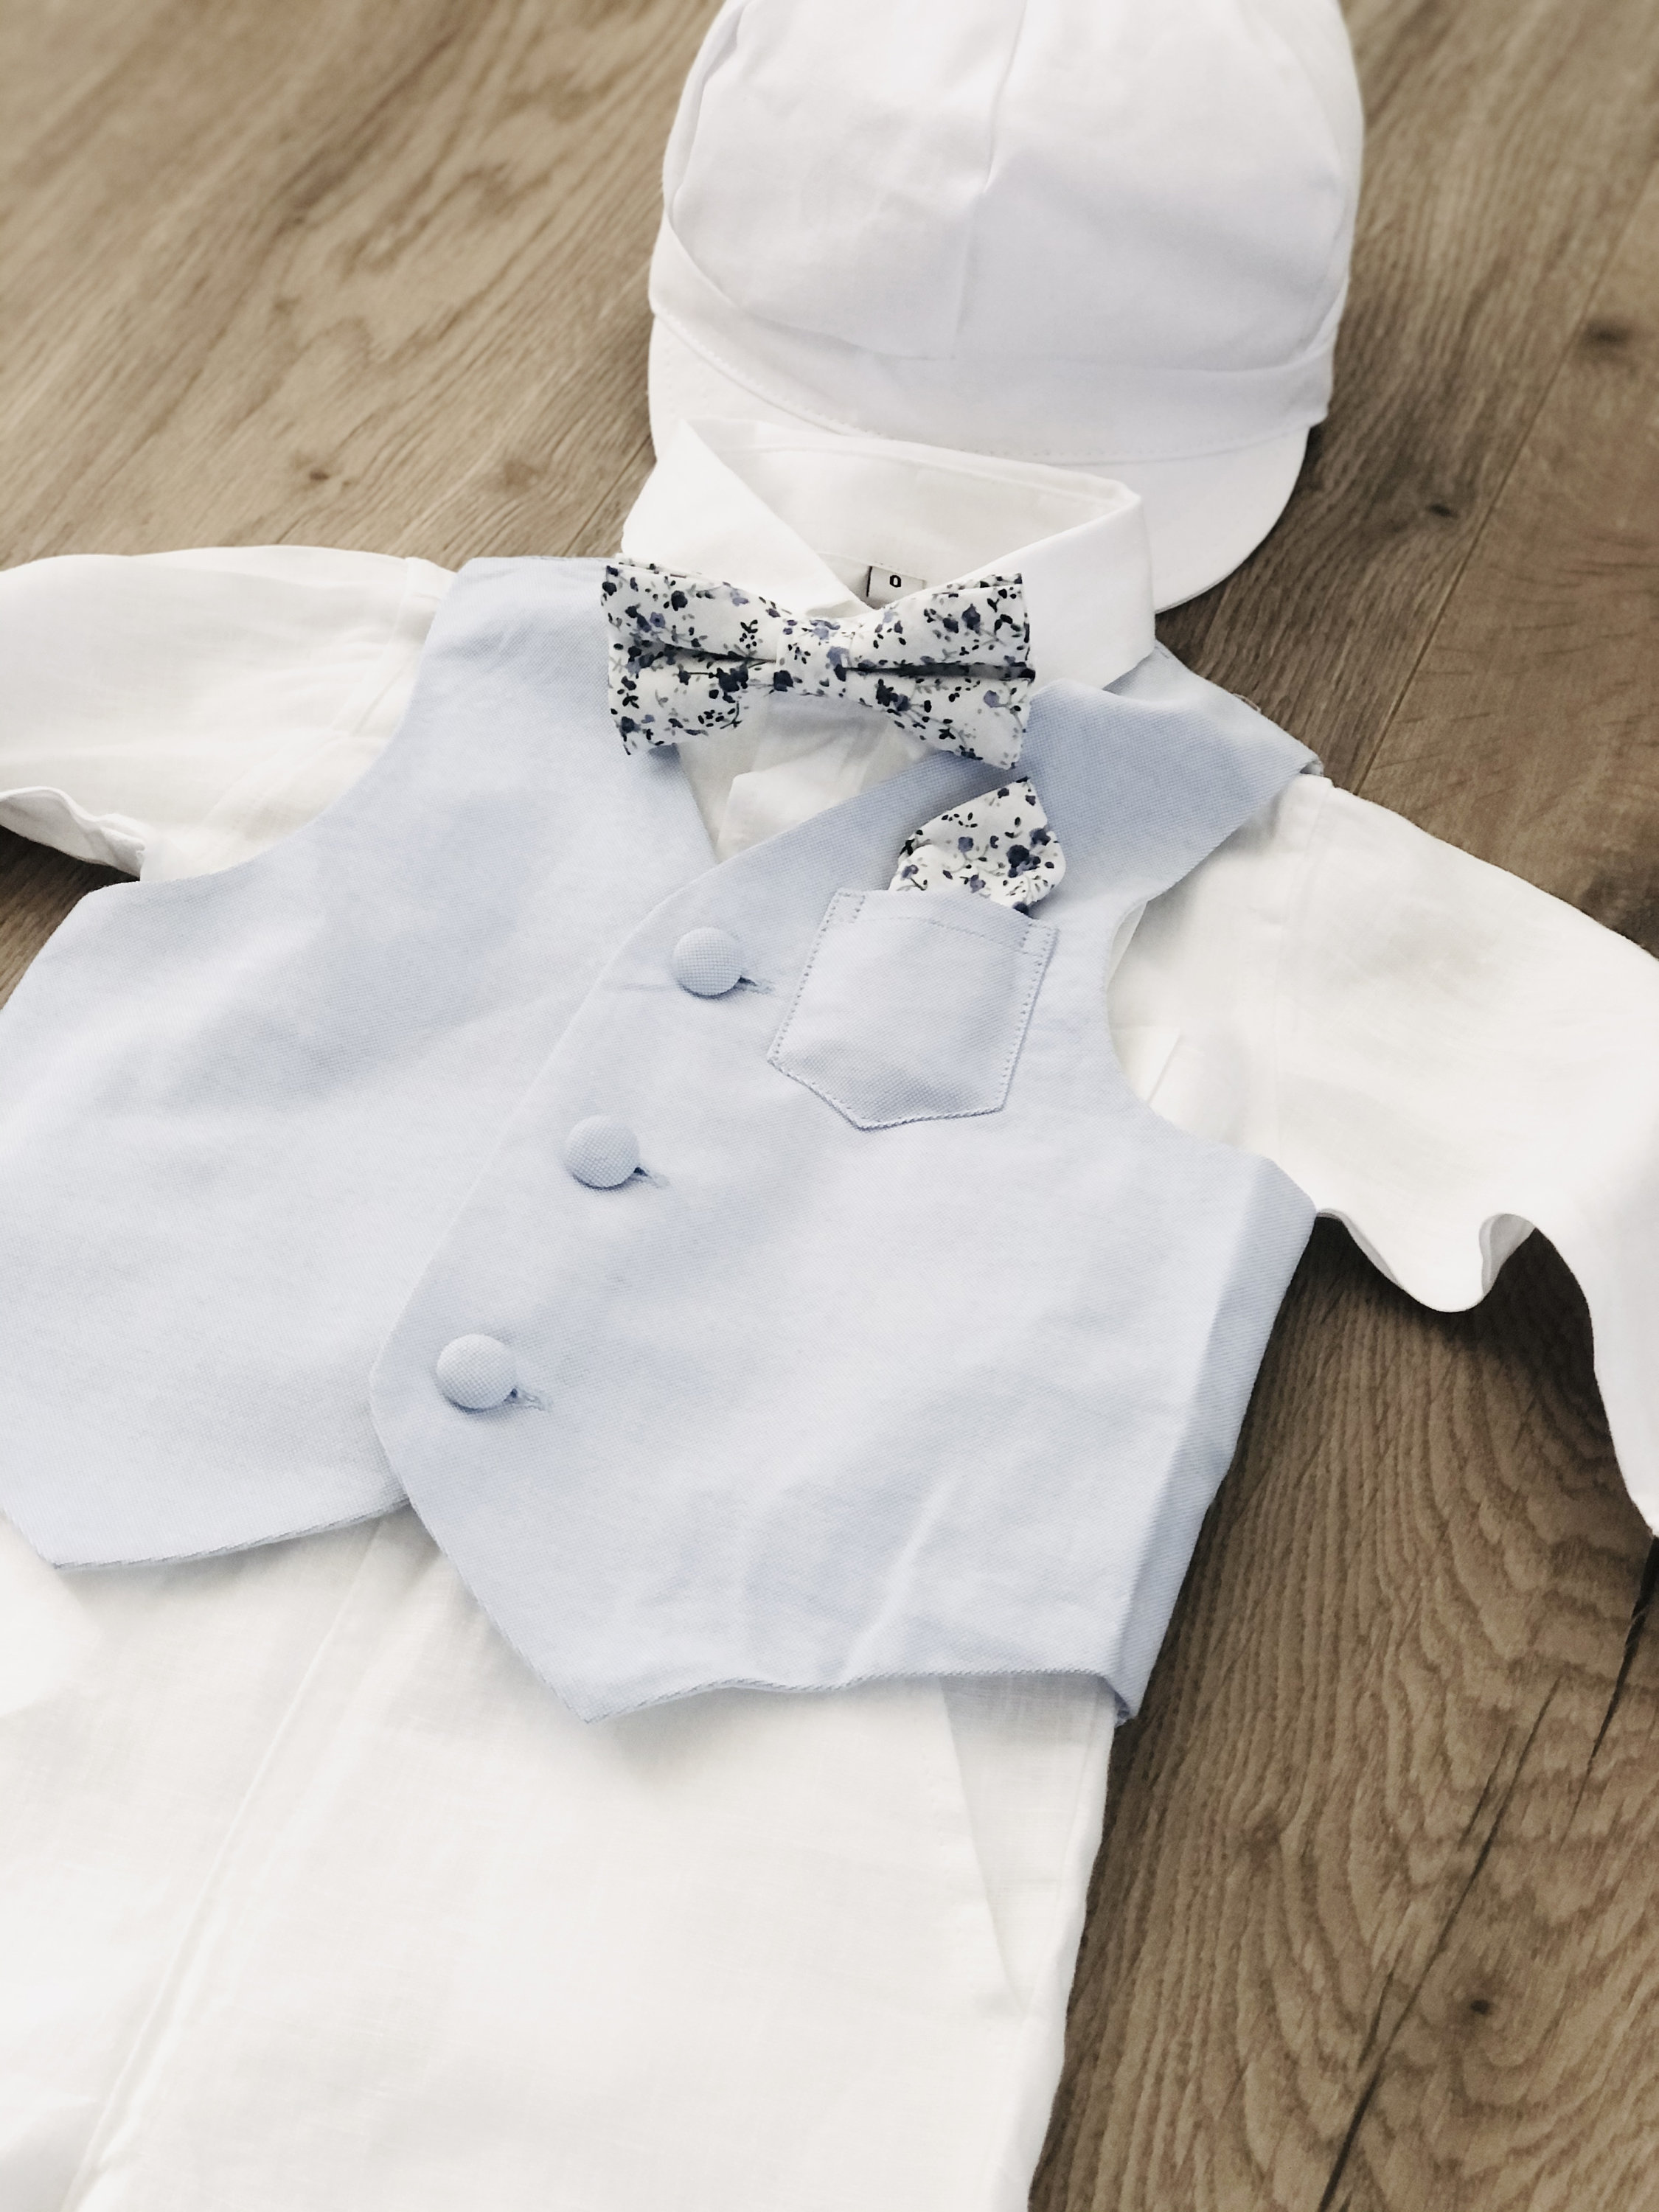 Boys Blue Chambray and White Baptism Wedding Outfit With Blue | Etsy ...